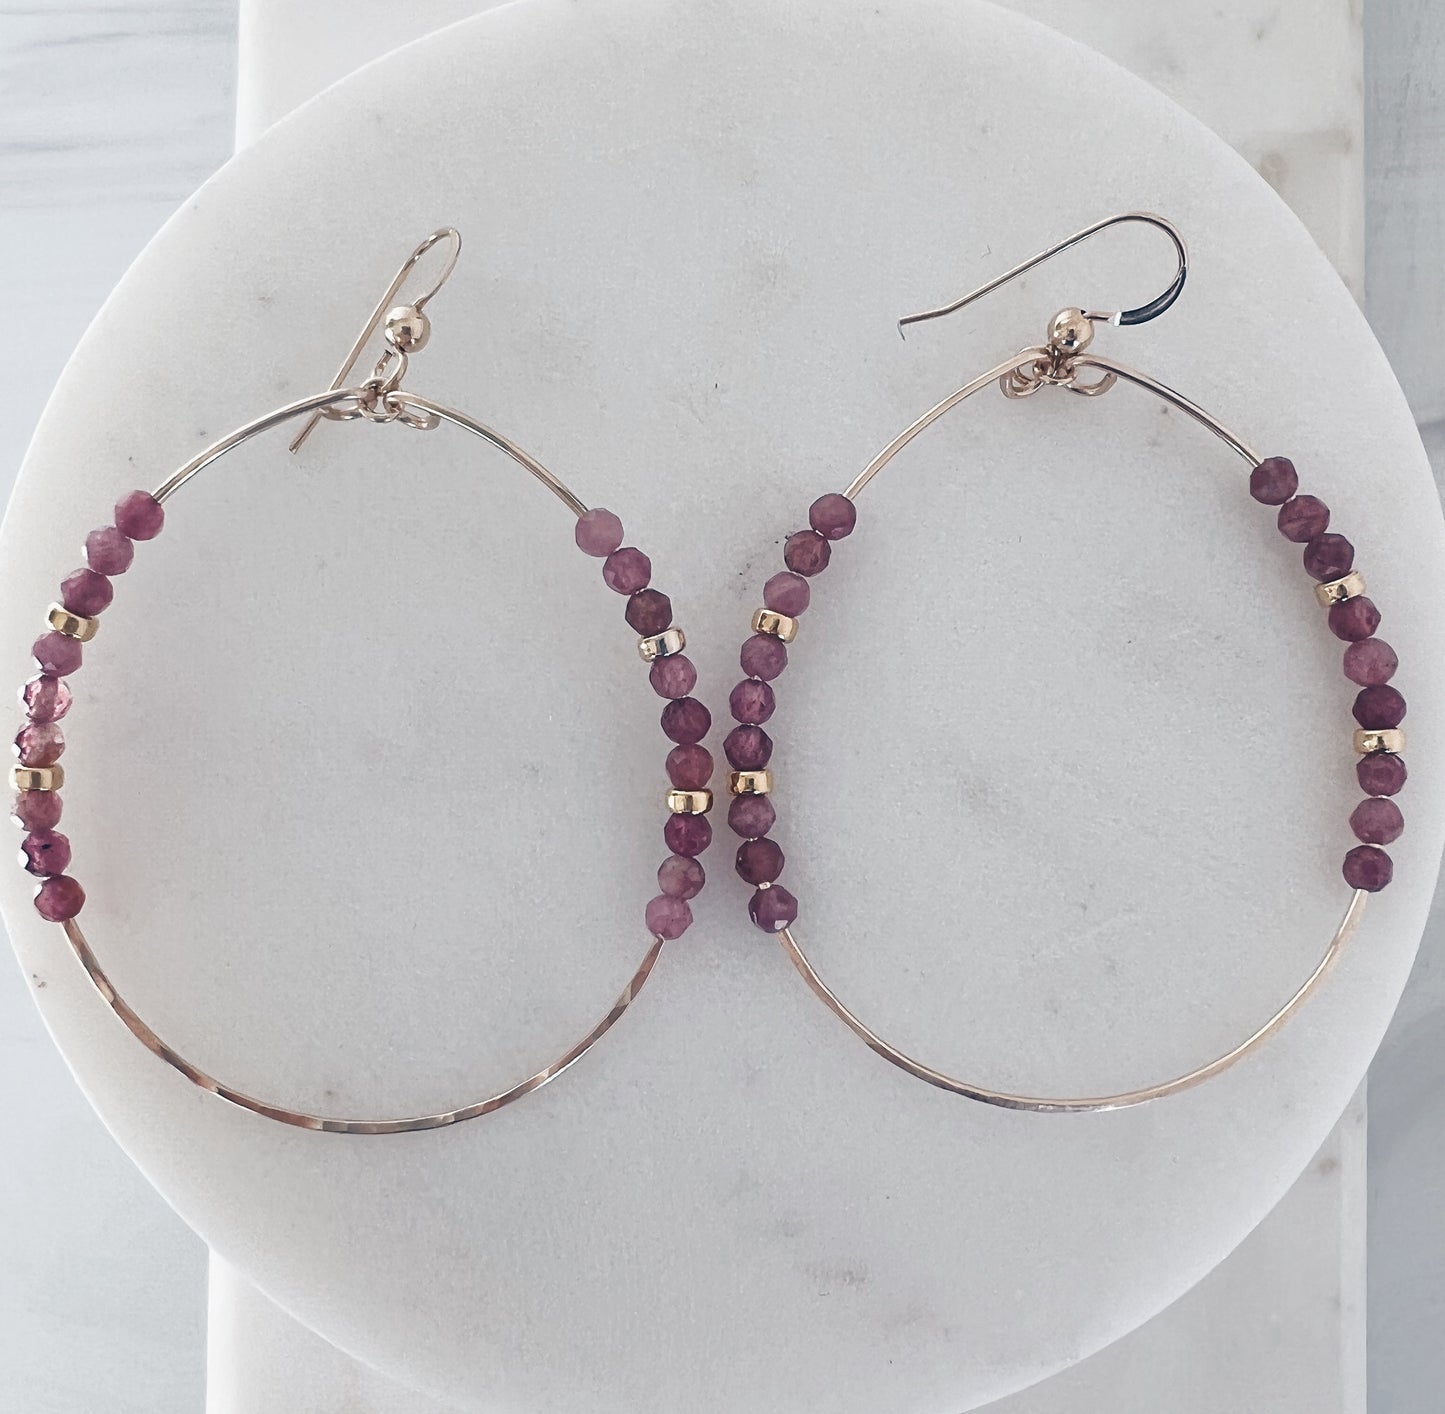 Floating Hoops + More Options